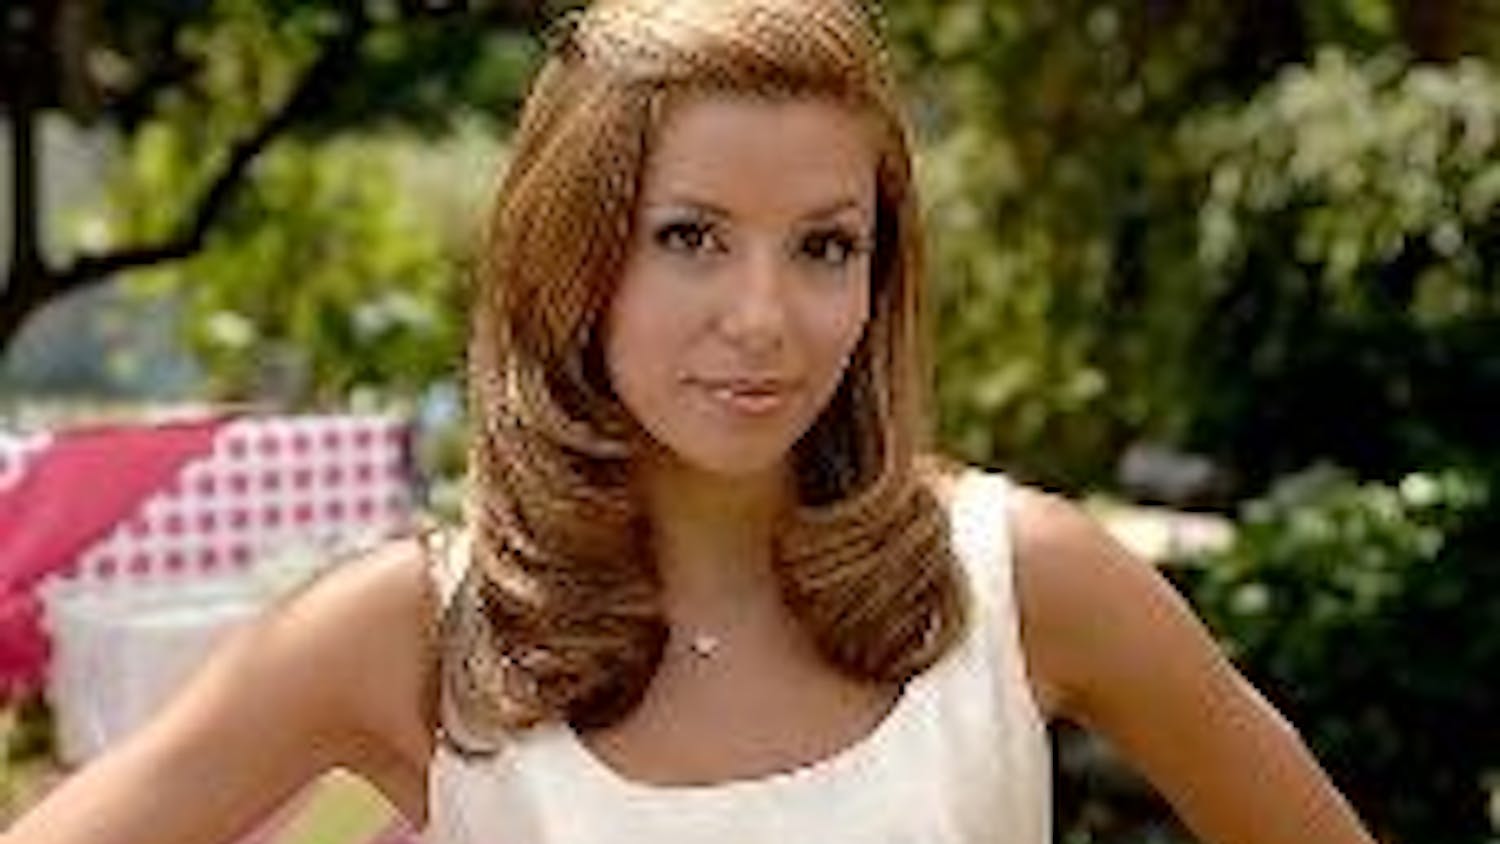 DEAD SEXY - Eva Longoria plays an uptight almost-newlywed with much the same personality as her famous "Desperate Housewives" character.  Acceptable acting from Paul Rudd cannot carry the flimsy plot, which is rife with awkward fart jokes and silly ghost 